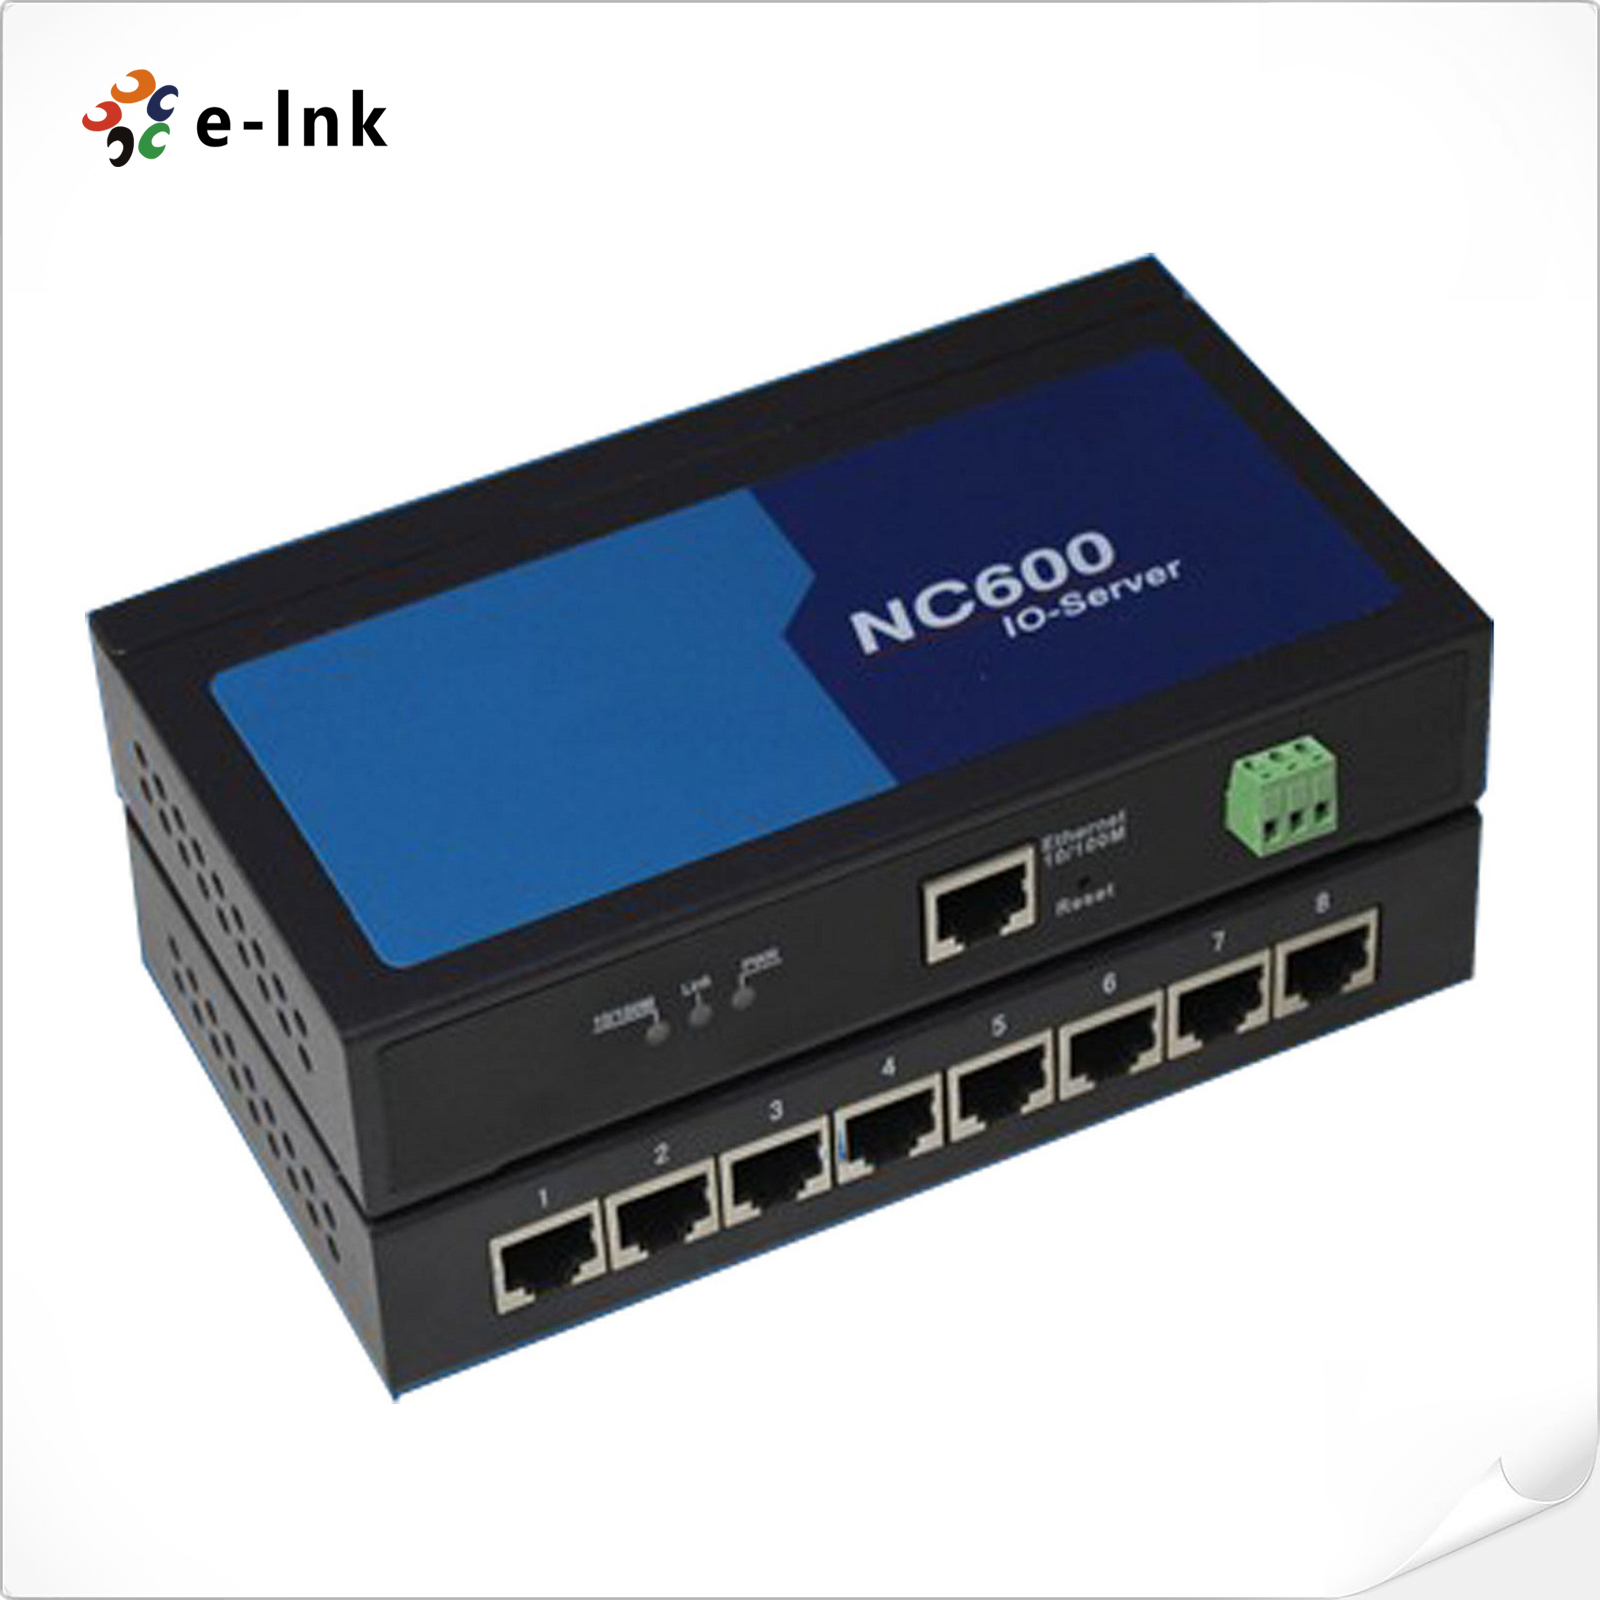 8-Port RS232/RS422/RS485 Serial Device Server